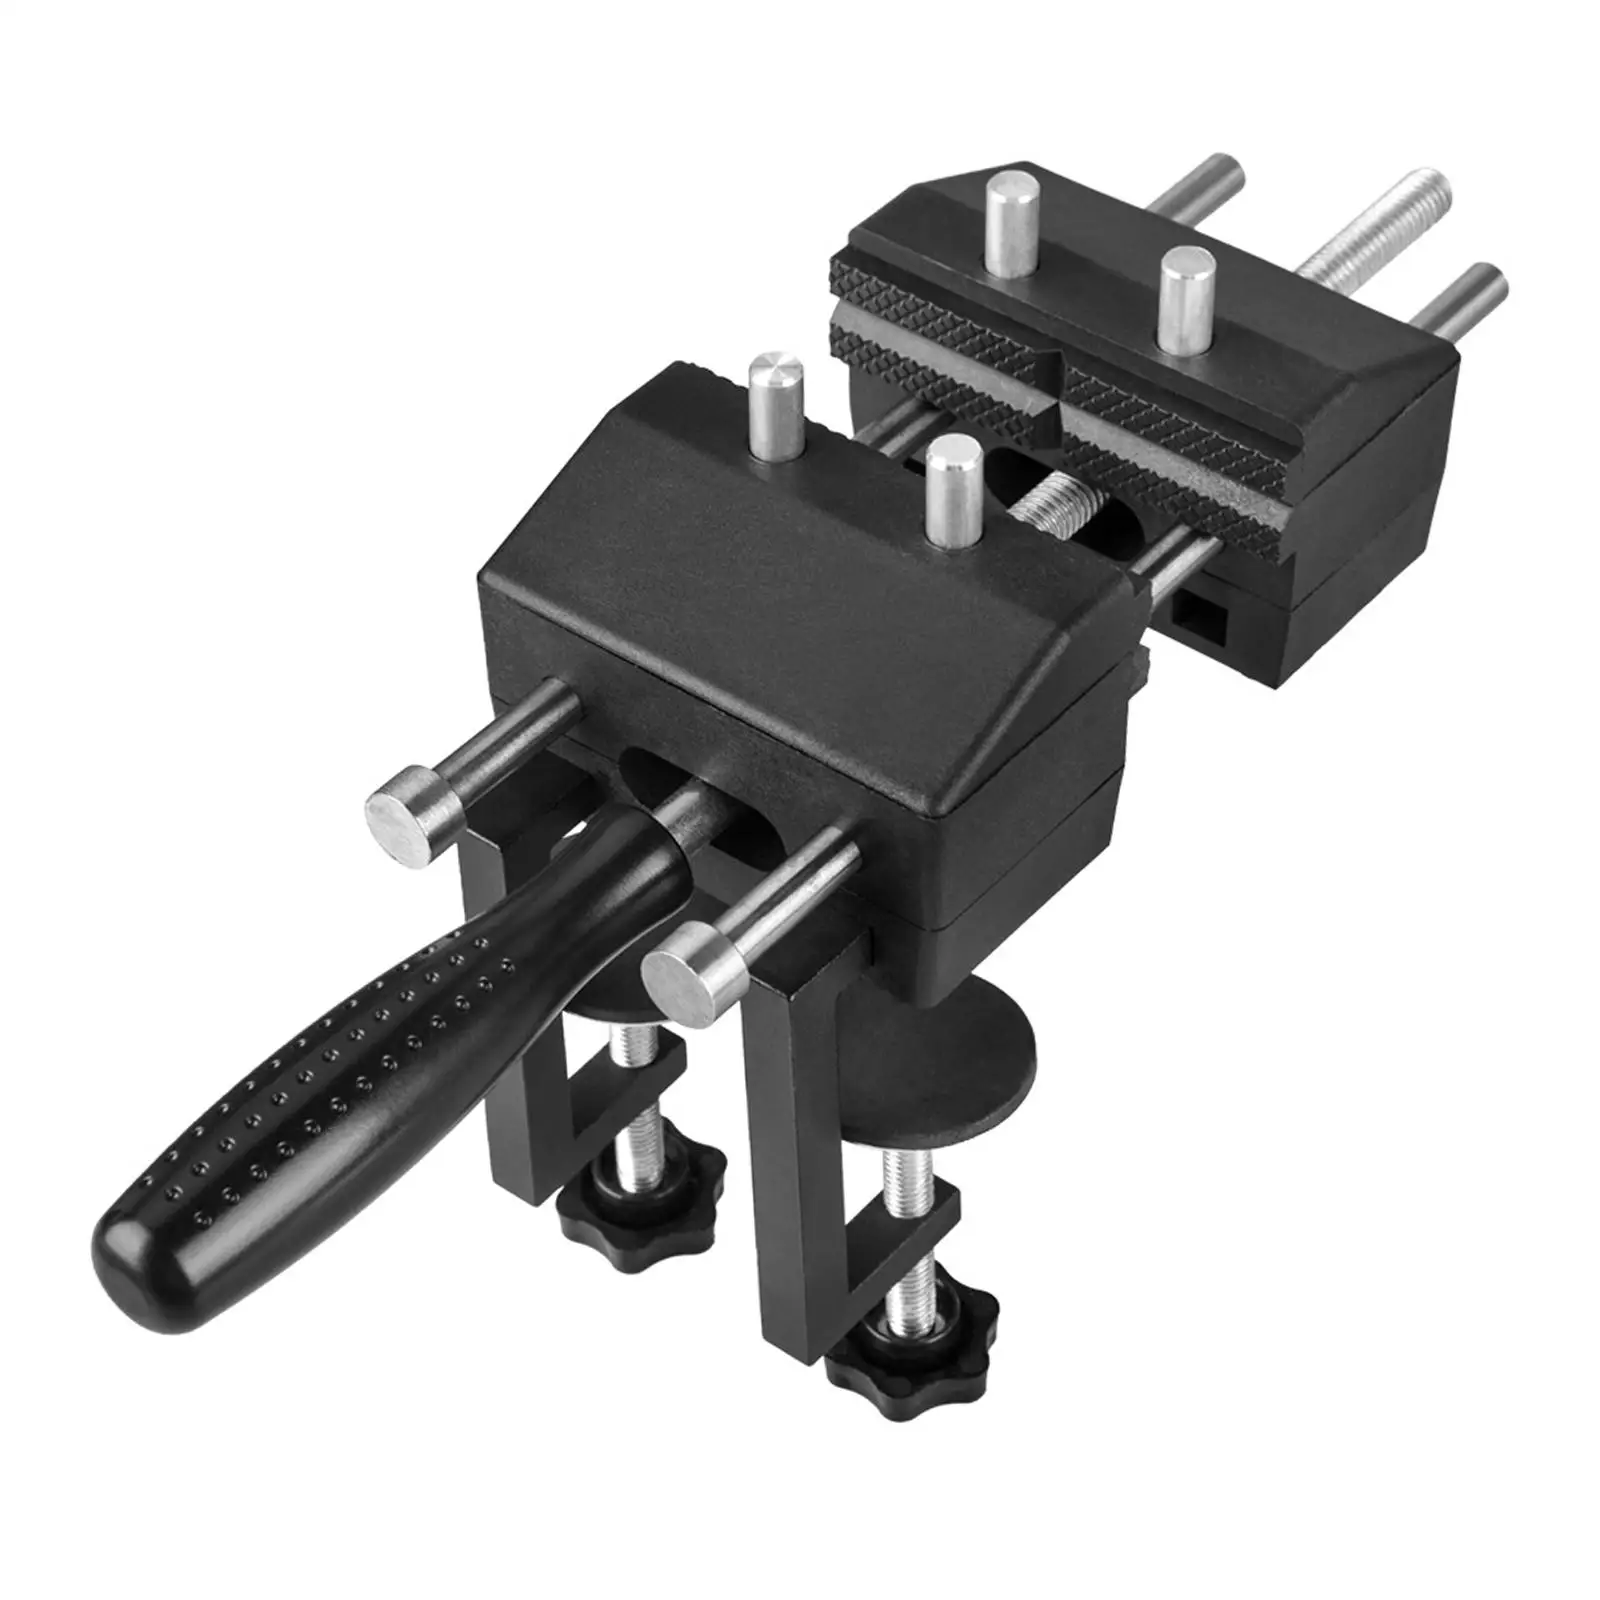 Bench Vise Clamp Quick Adjustment Metalworking Adjustable Table Vice Clamp